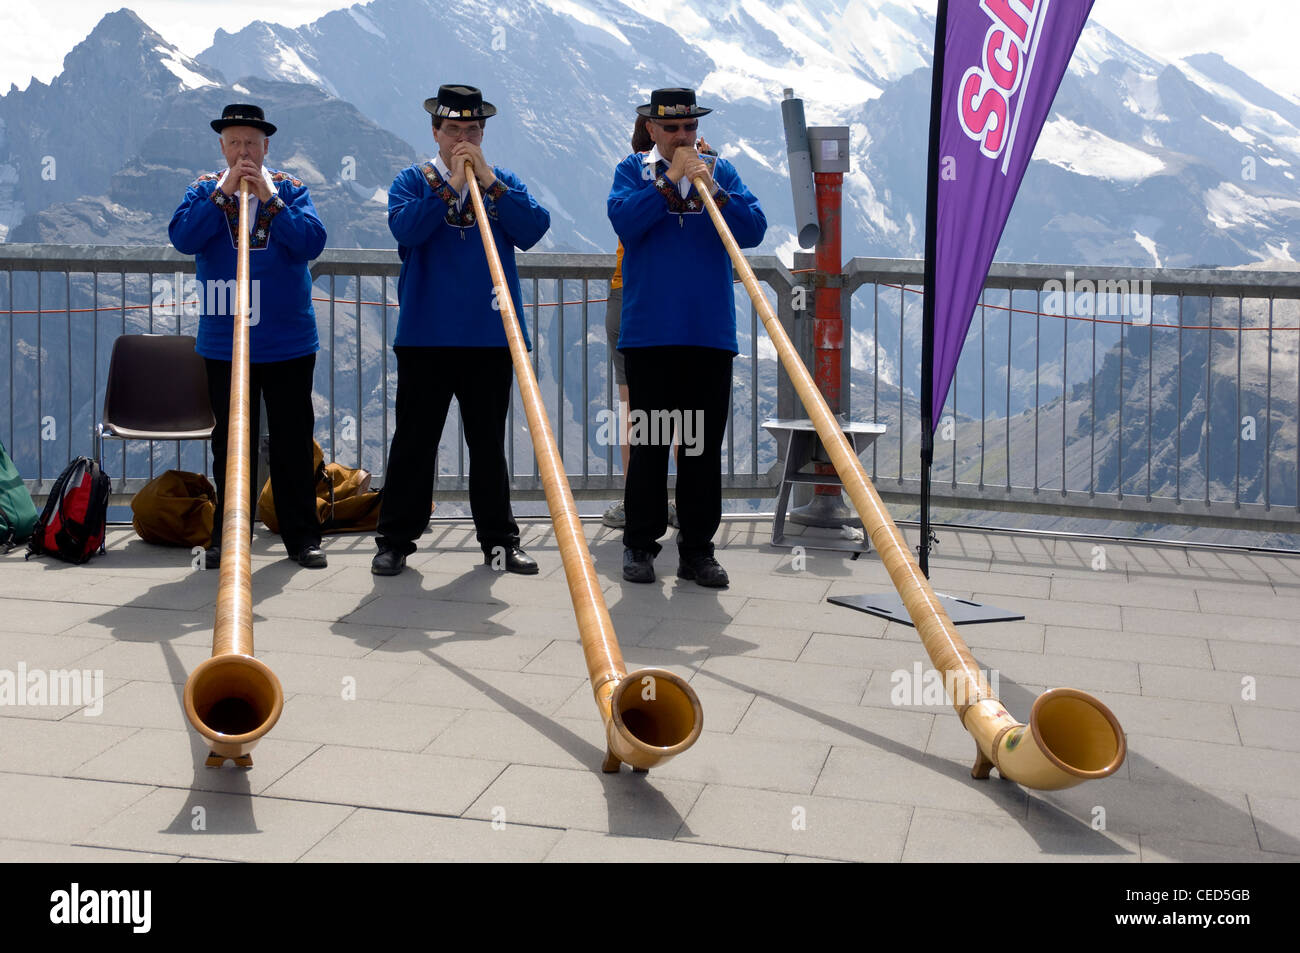 Horizontal close up portrait of three traditionally dressed Swiss men playing the Alpine horn with the Swiss Alps behind them. Stock Photo